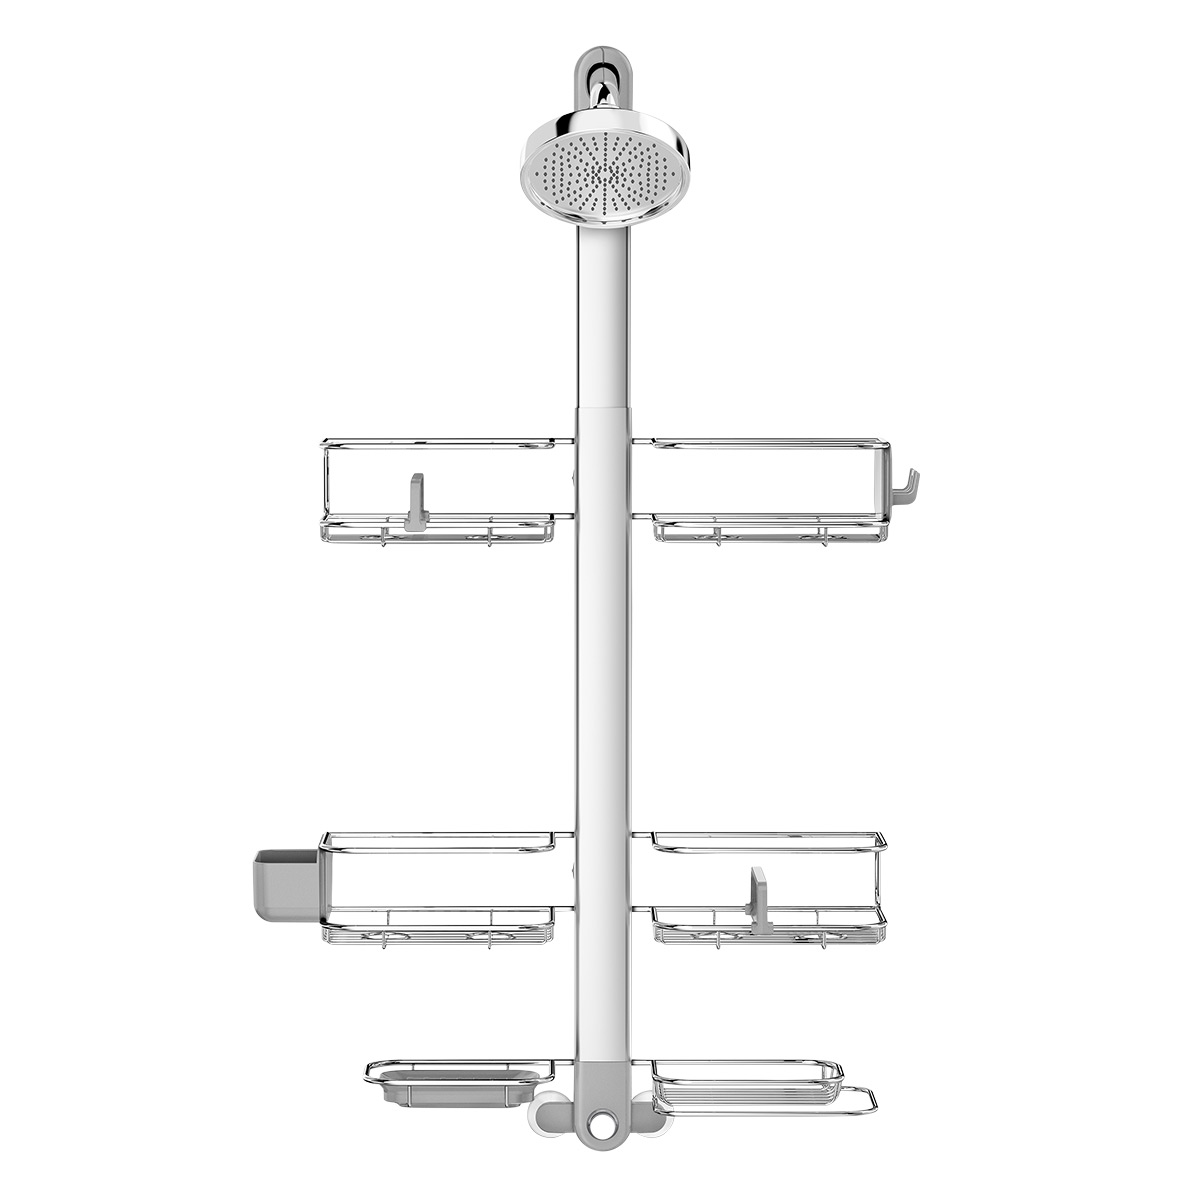 simplehuman adjustable shower caddy product support